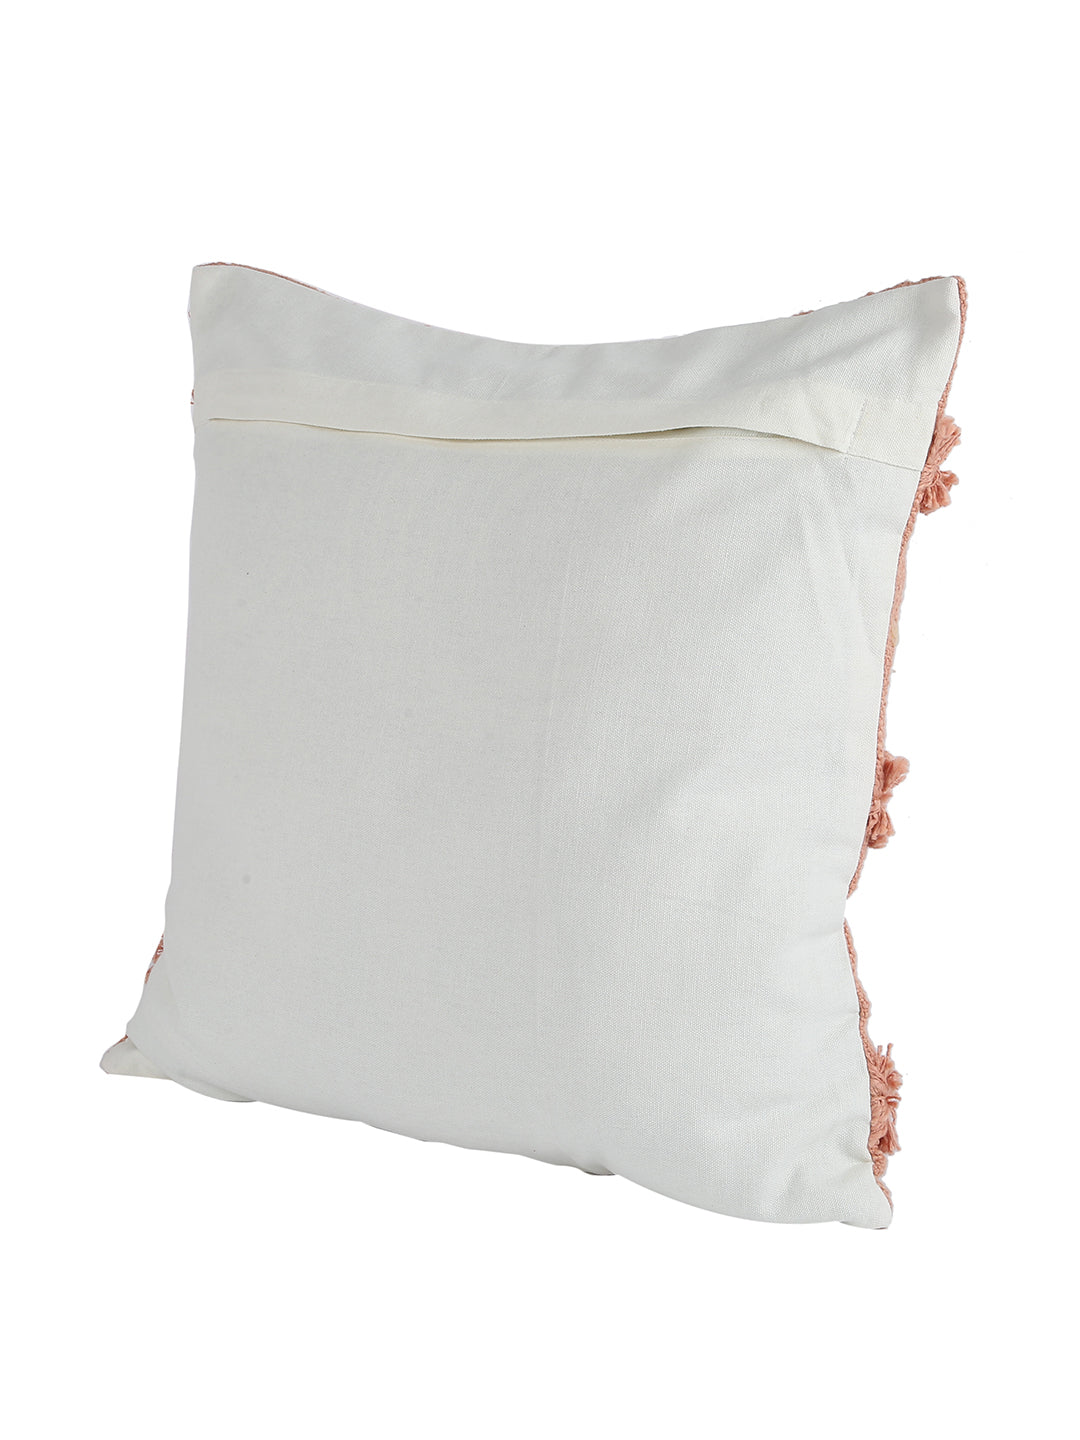 Peach-Colored Set of 2 Embroidered Square Cushion Covers